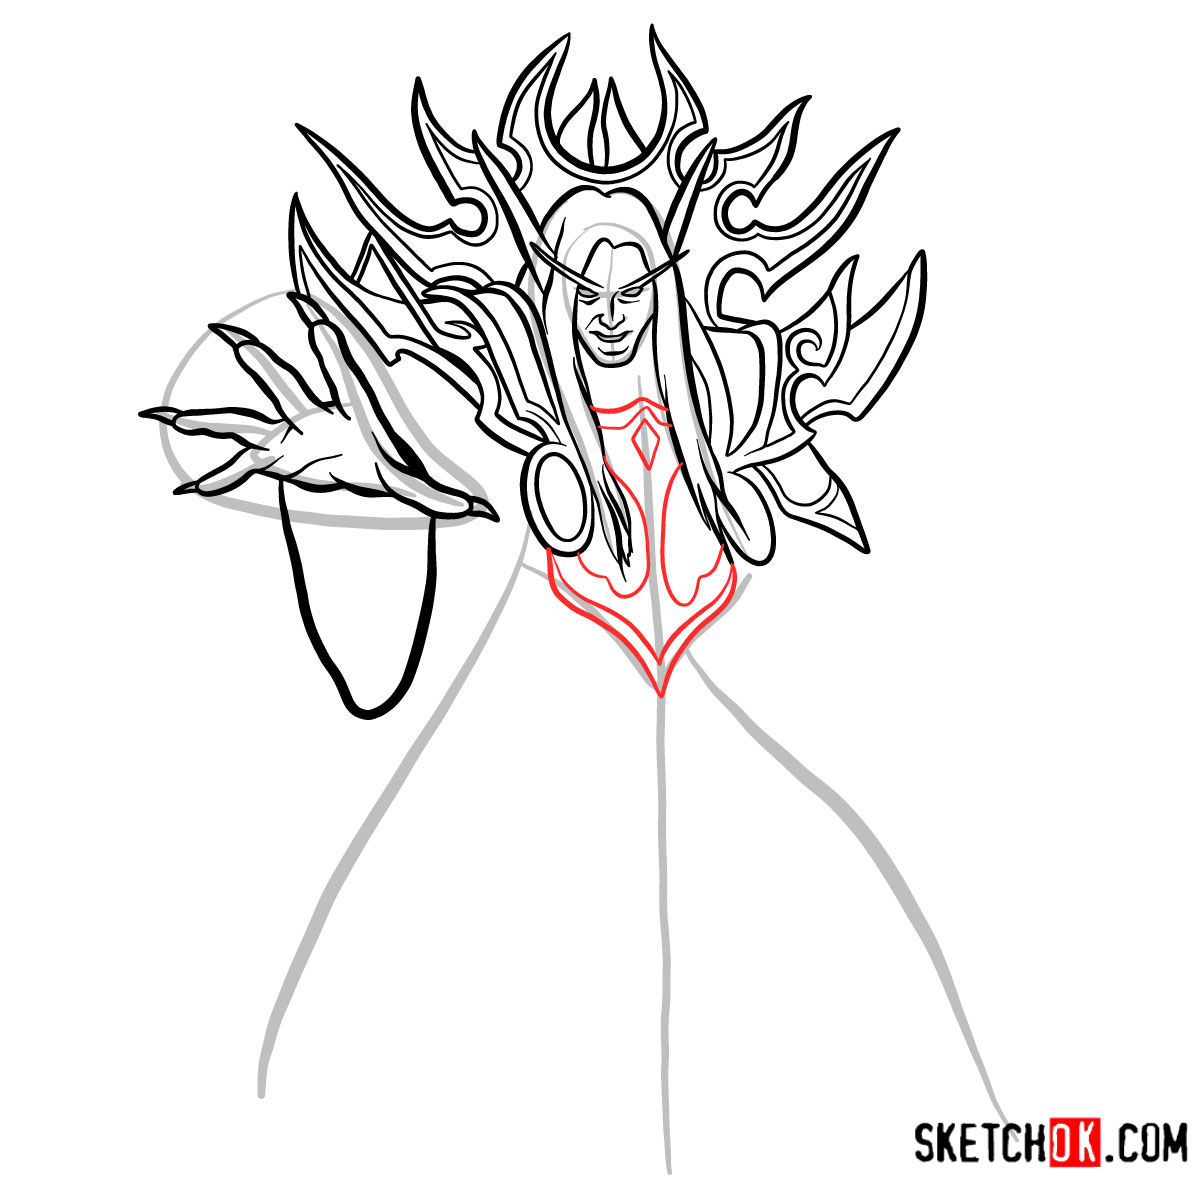 How to draw Kael'thas Sunstrider | World of Warcraft - step 10